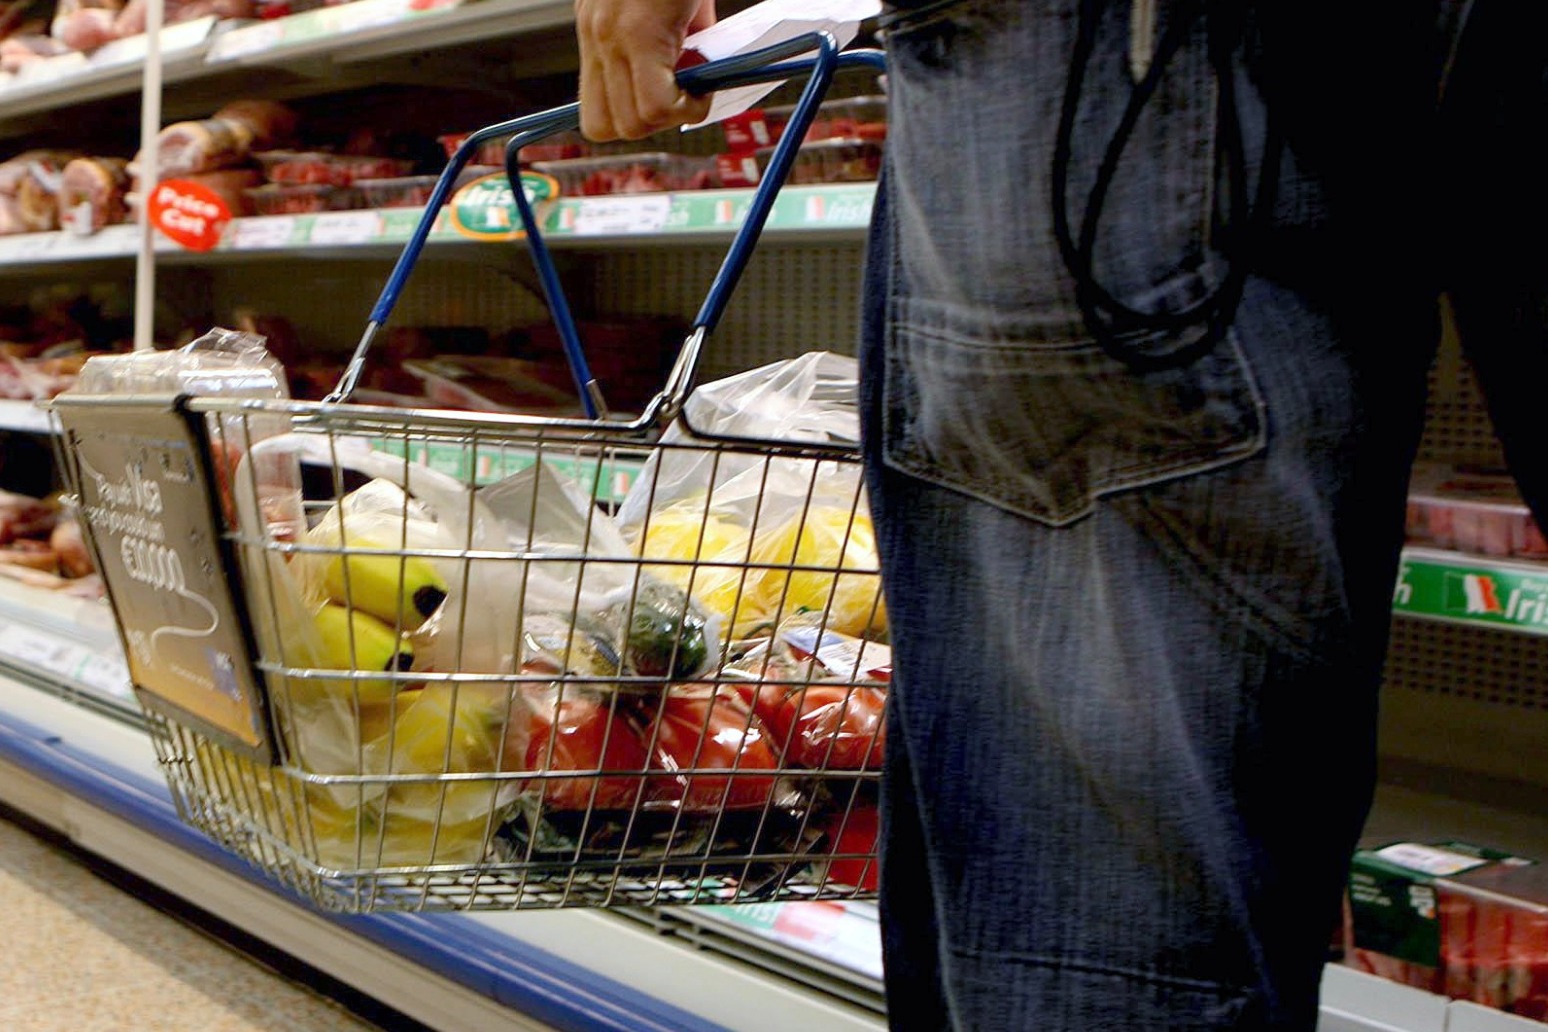 Food inflation soars to record 11.6% as energy costs hit producers 